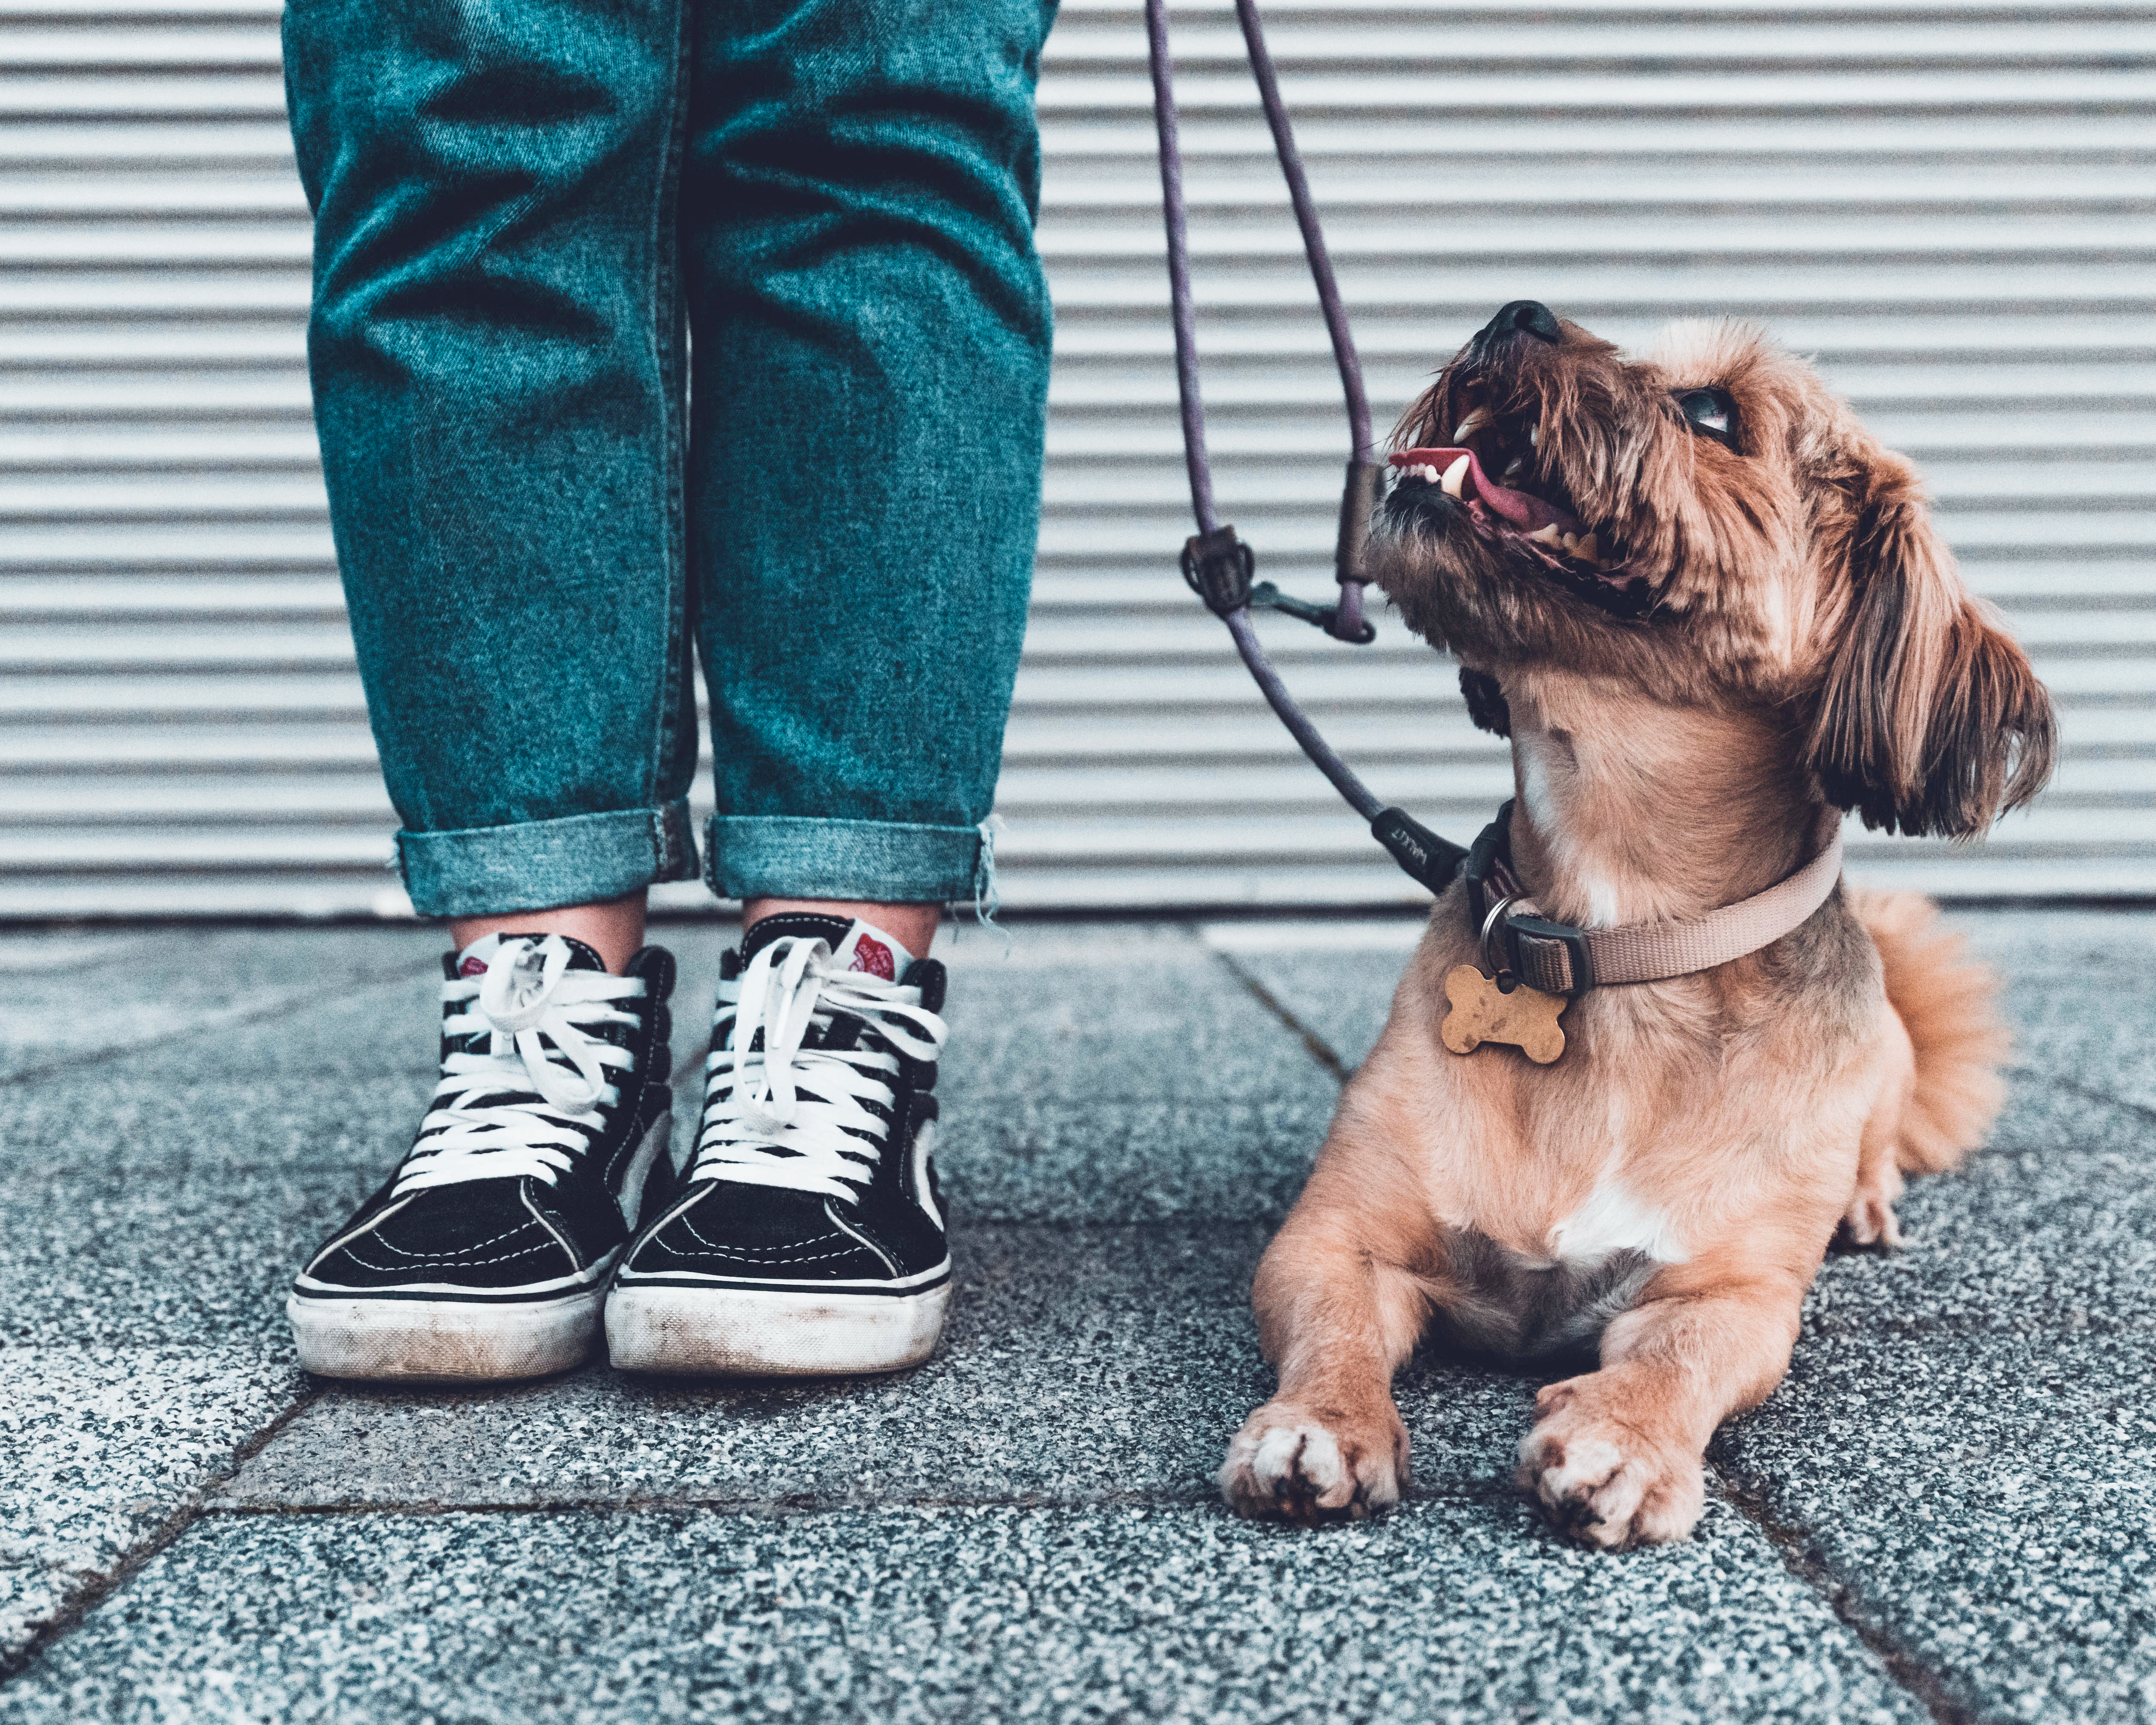 6 Essential Commands To Teach Your Dog (And How)